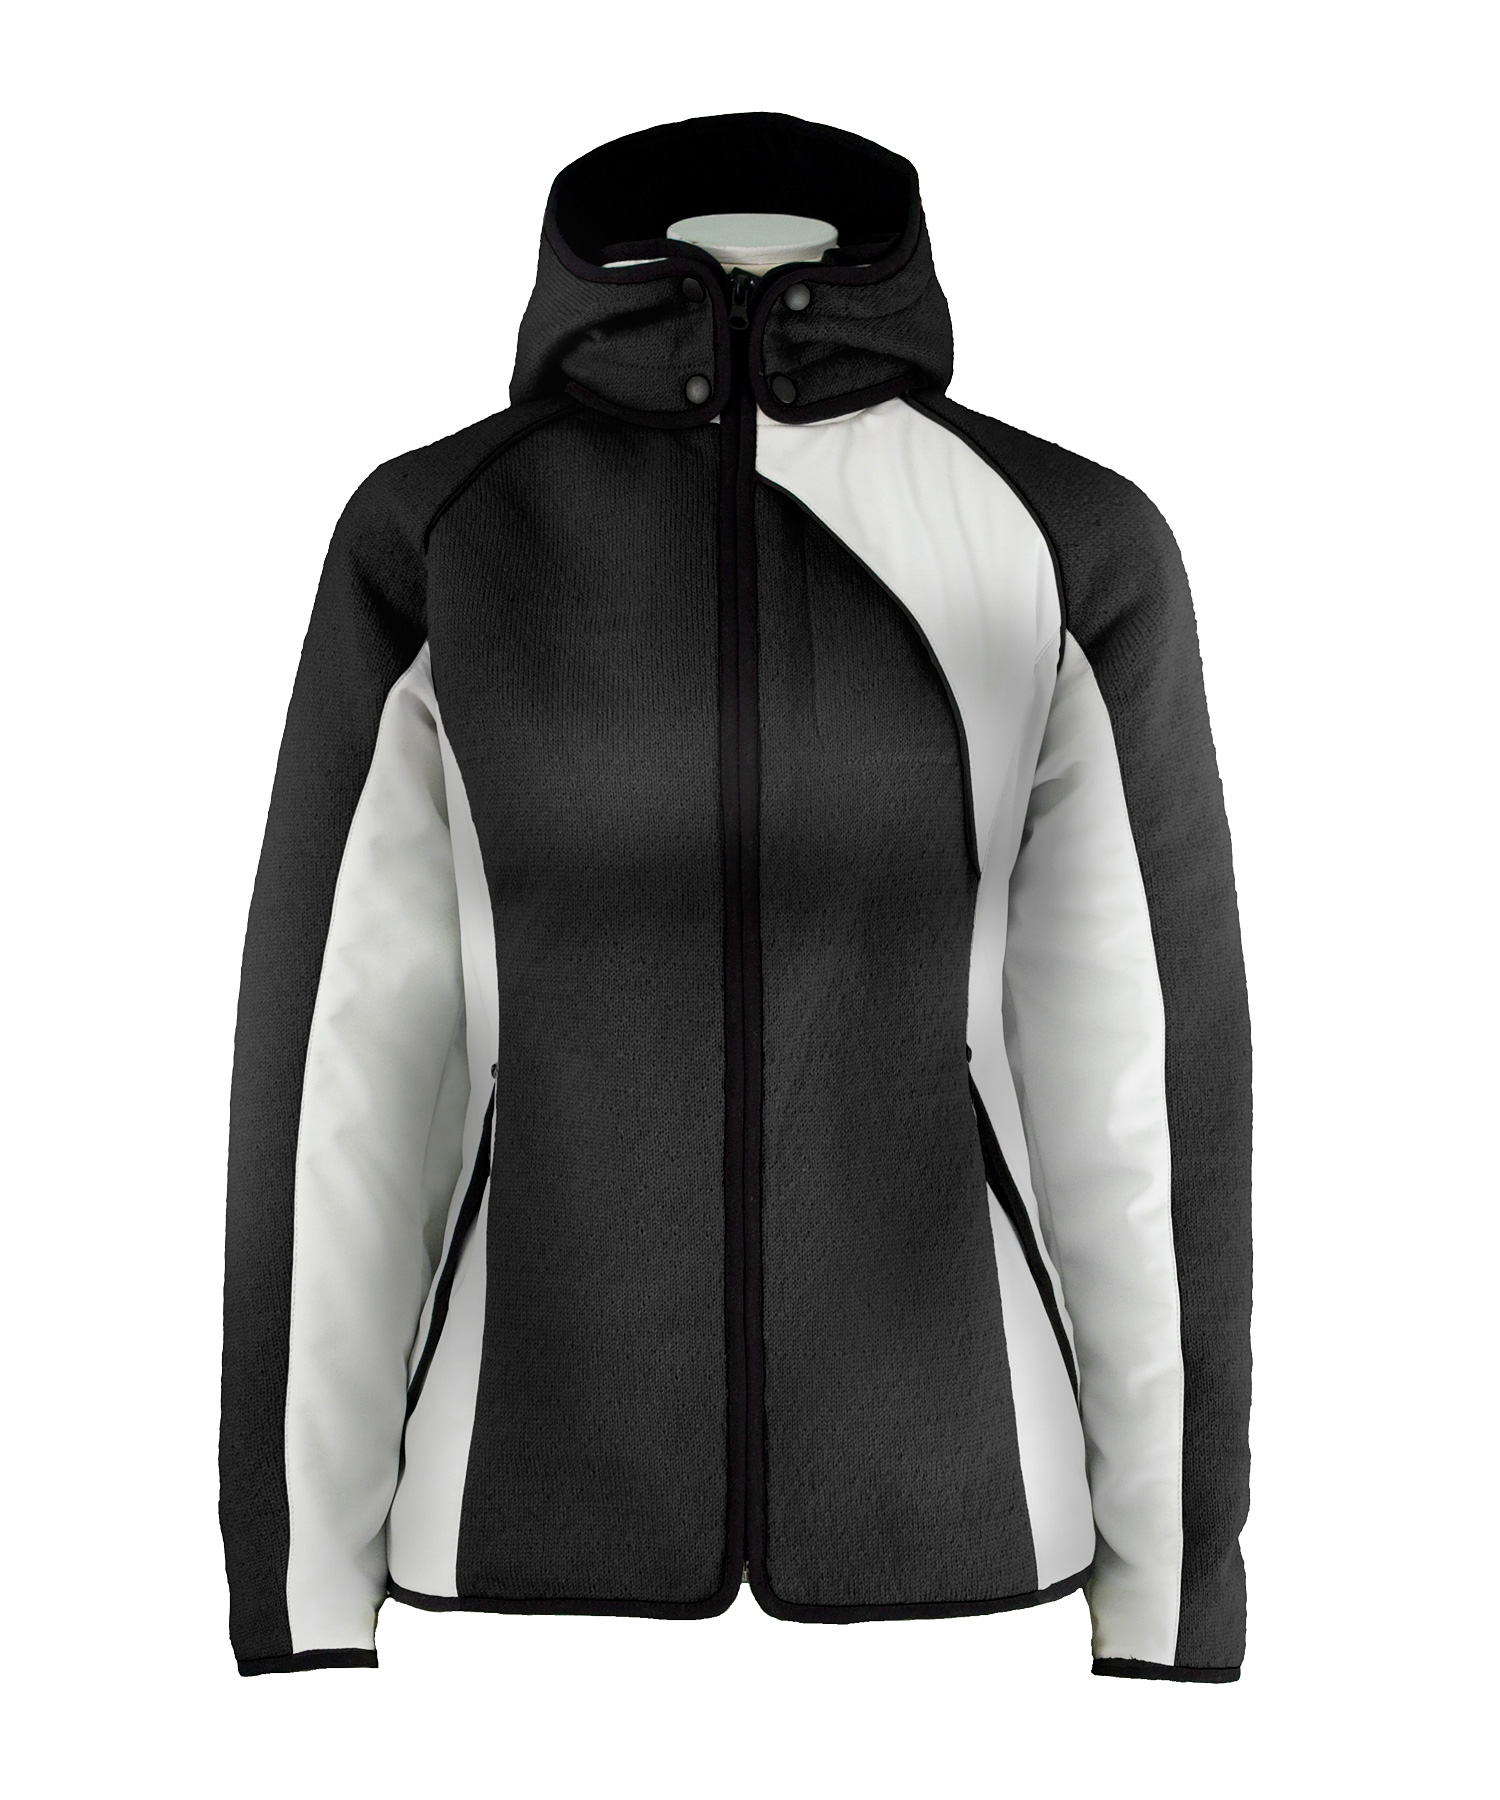 Dale of Norway Val Gardena Knitshell Jacket Women's at NorwaySports.com  Archive